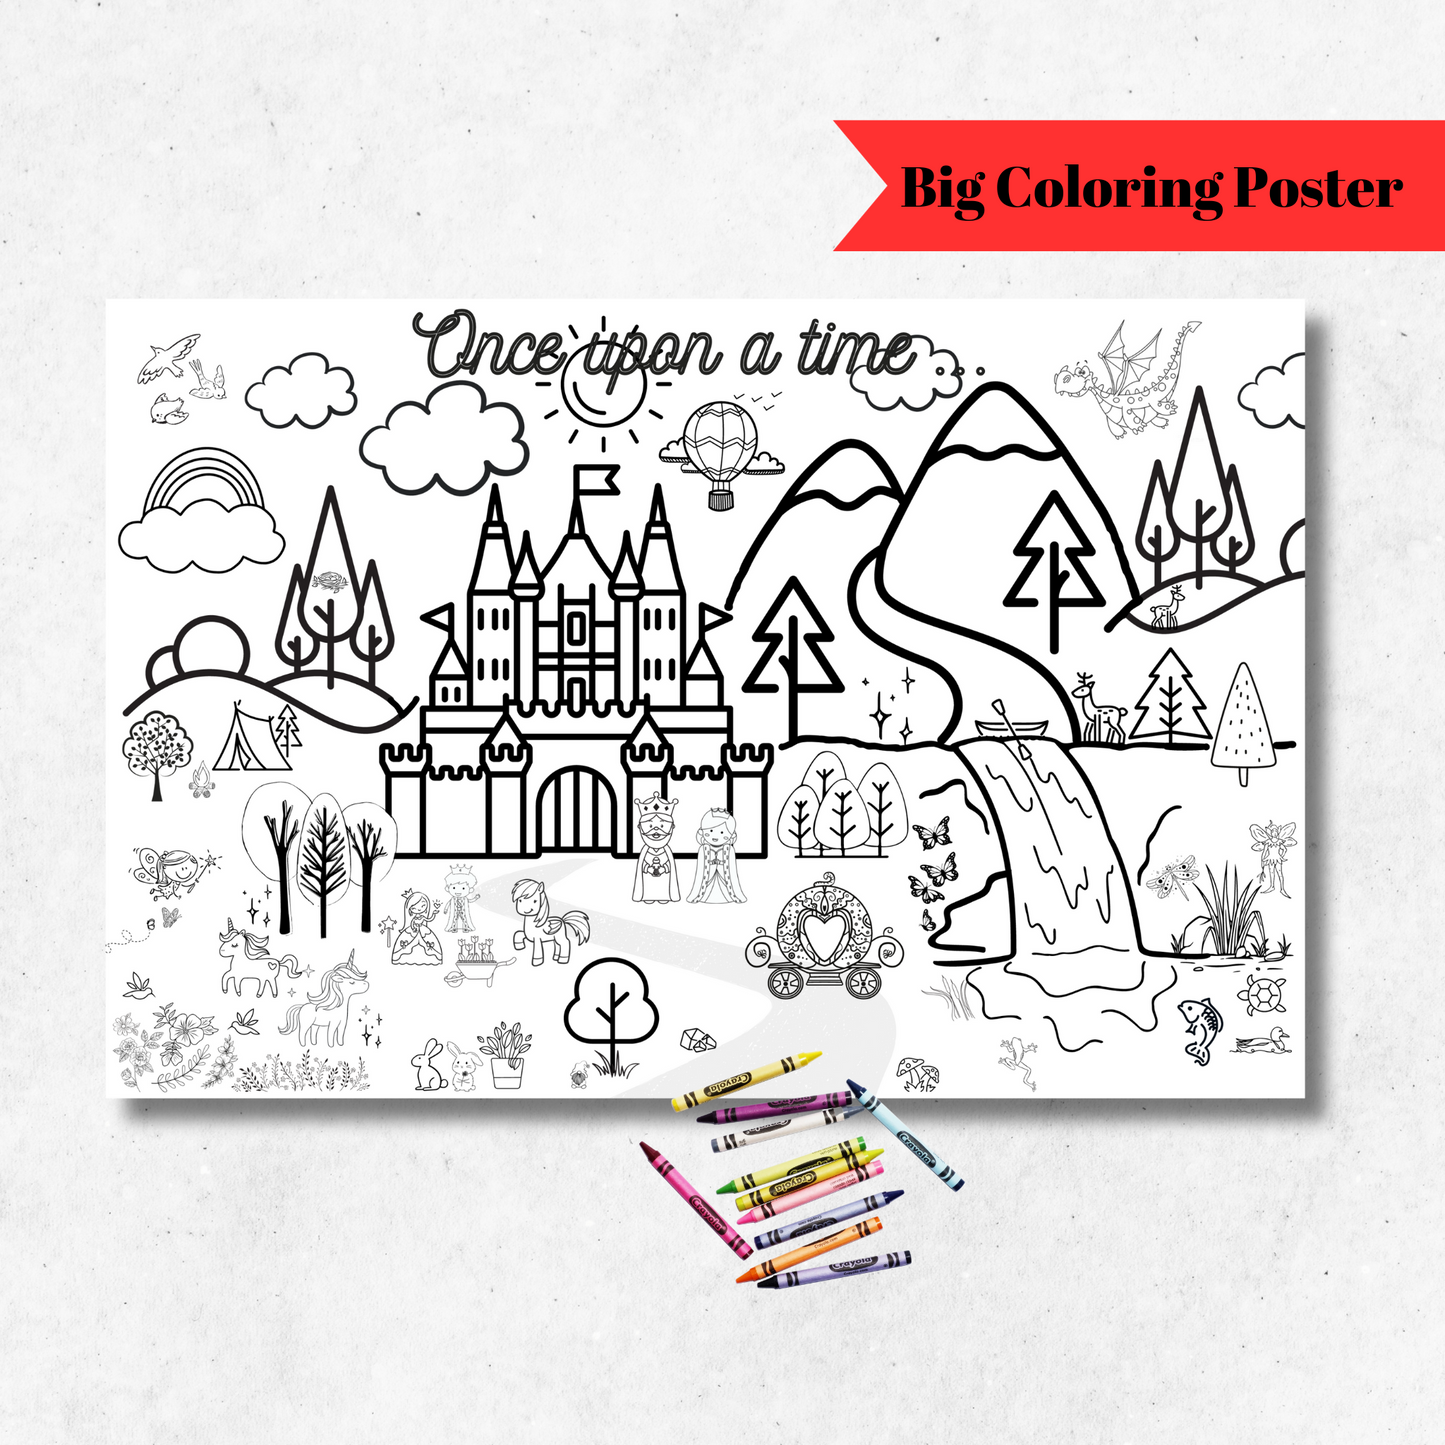 Once Upon A Time Coloring Poster | 24x36